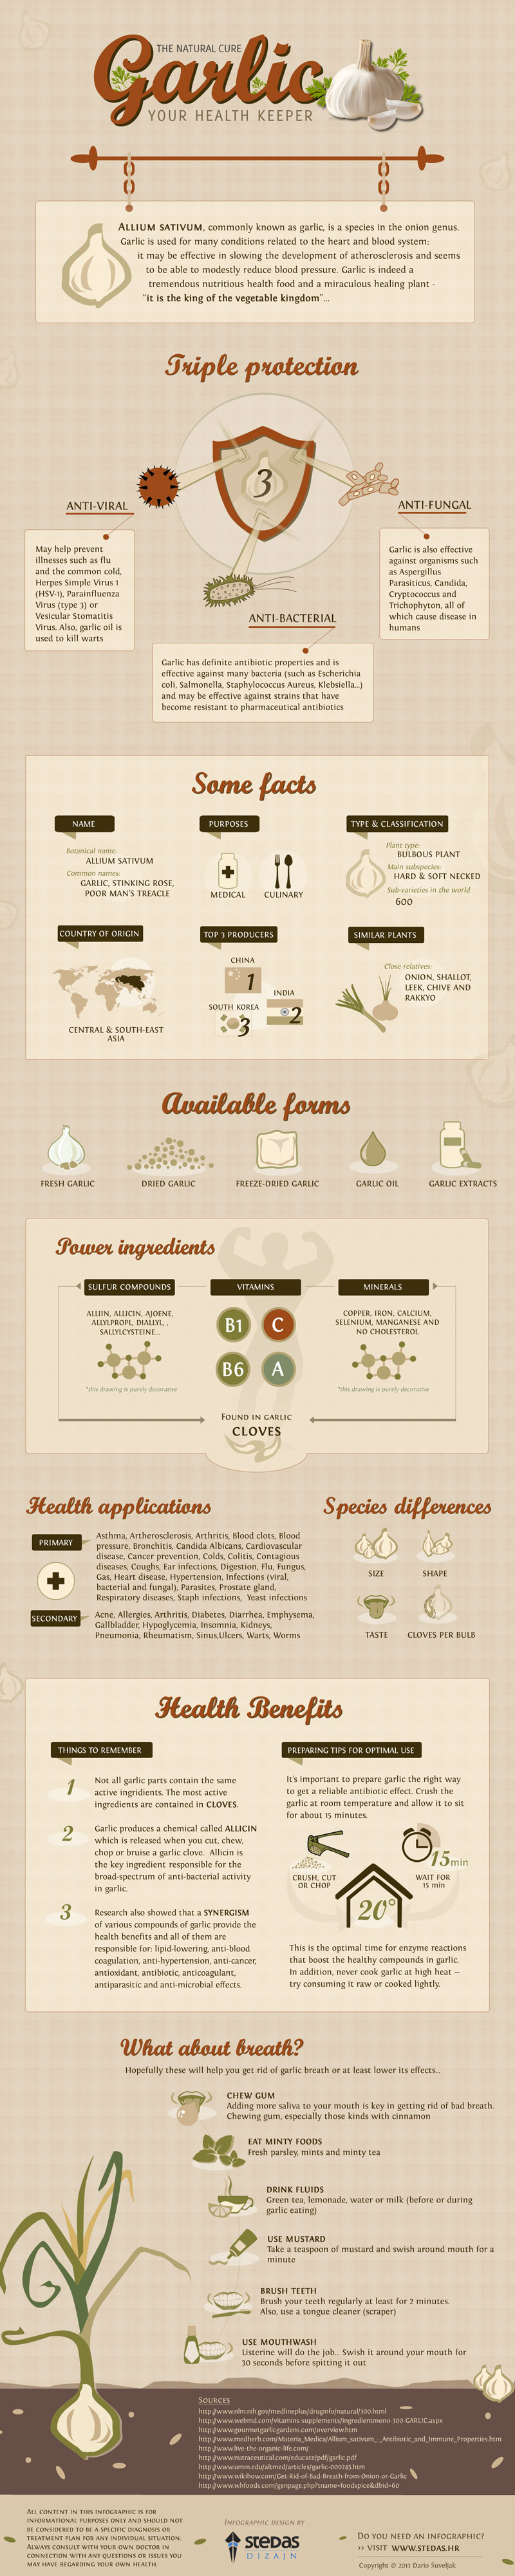 All Benefits Of Garlic Infographic